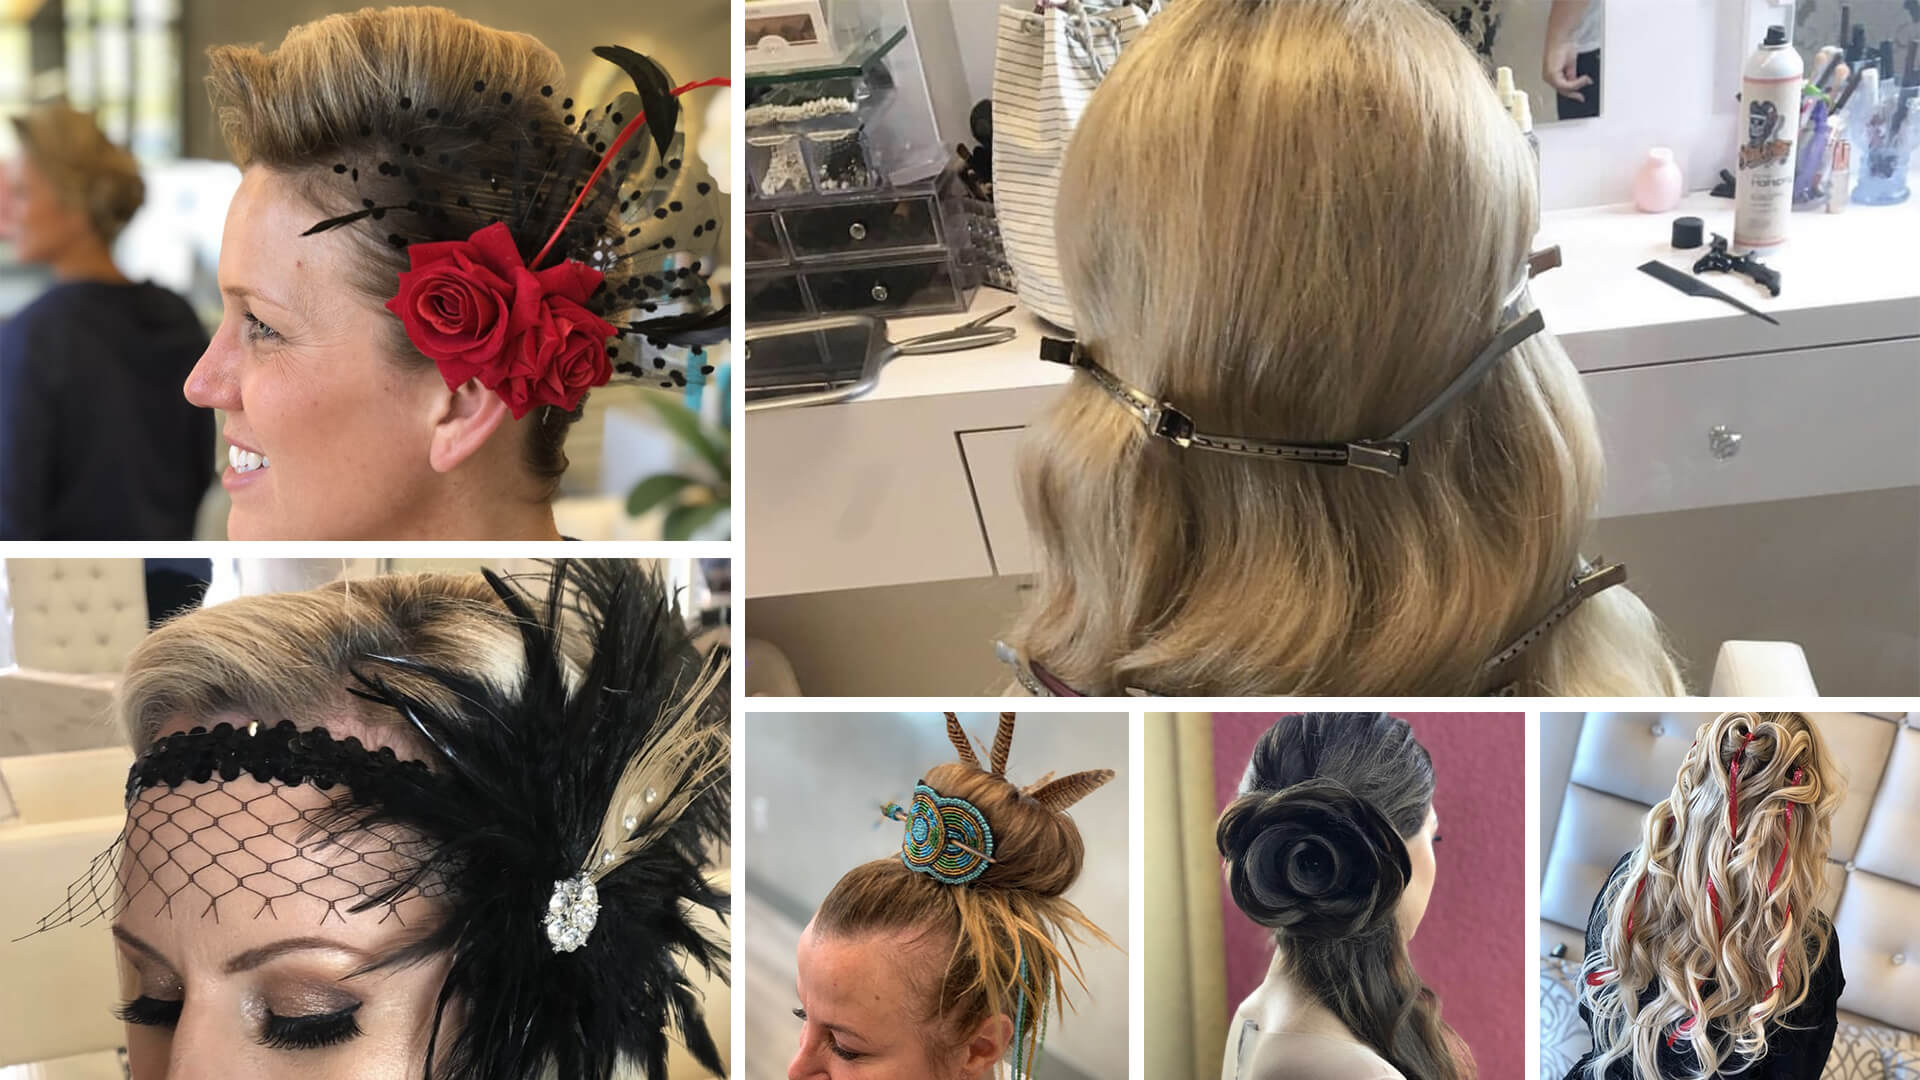 Different hairstyles and hair accessories